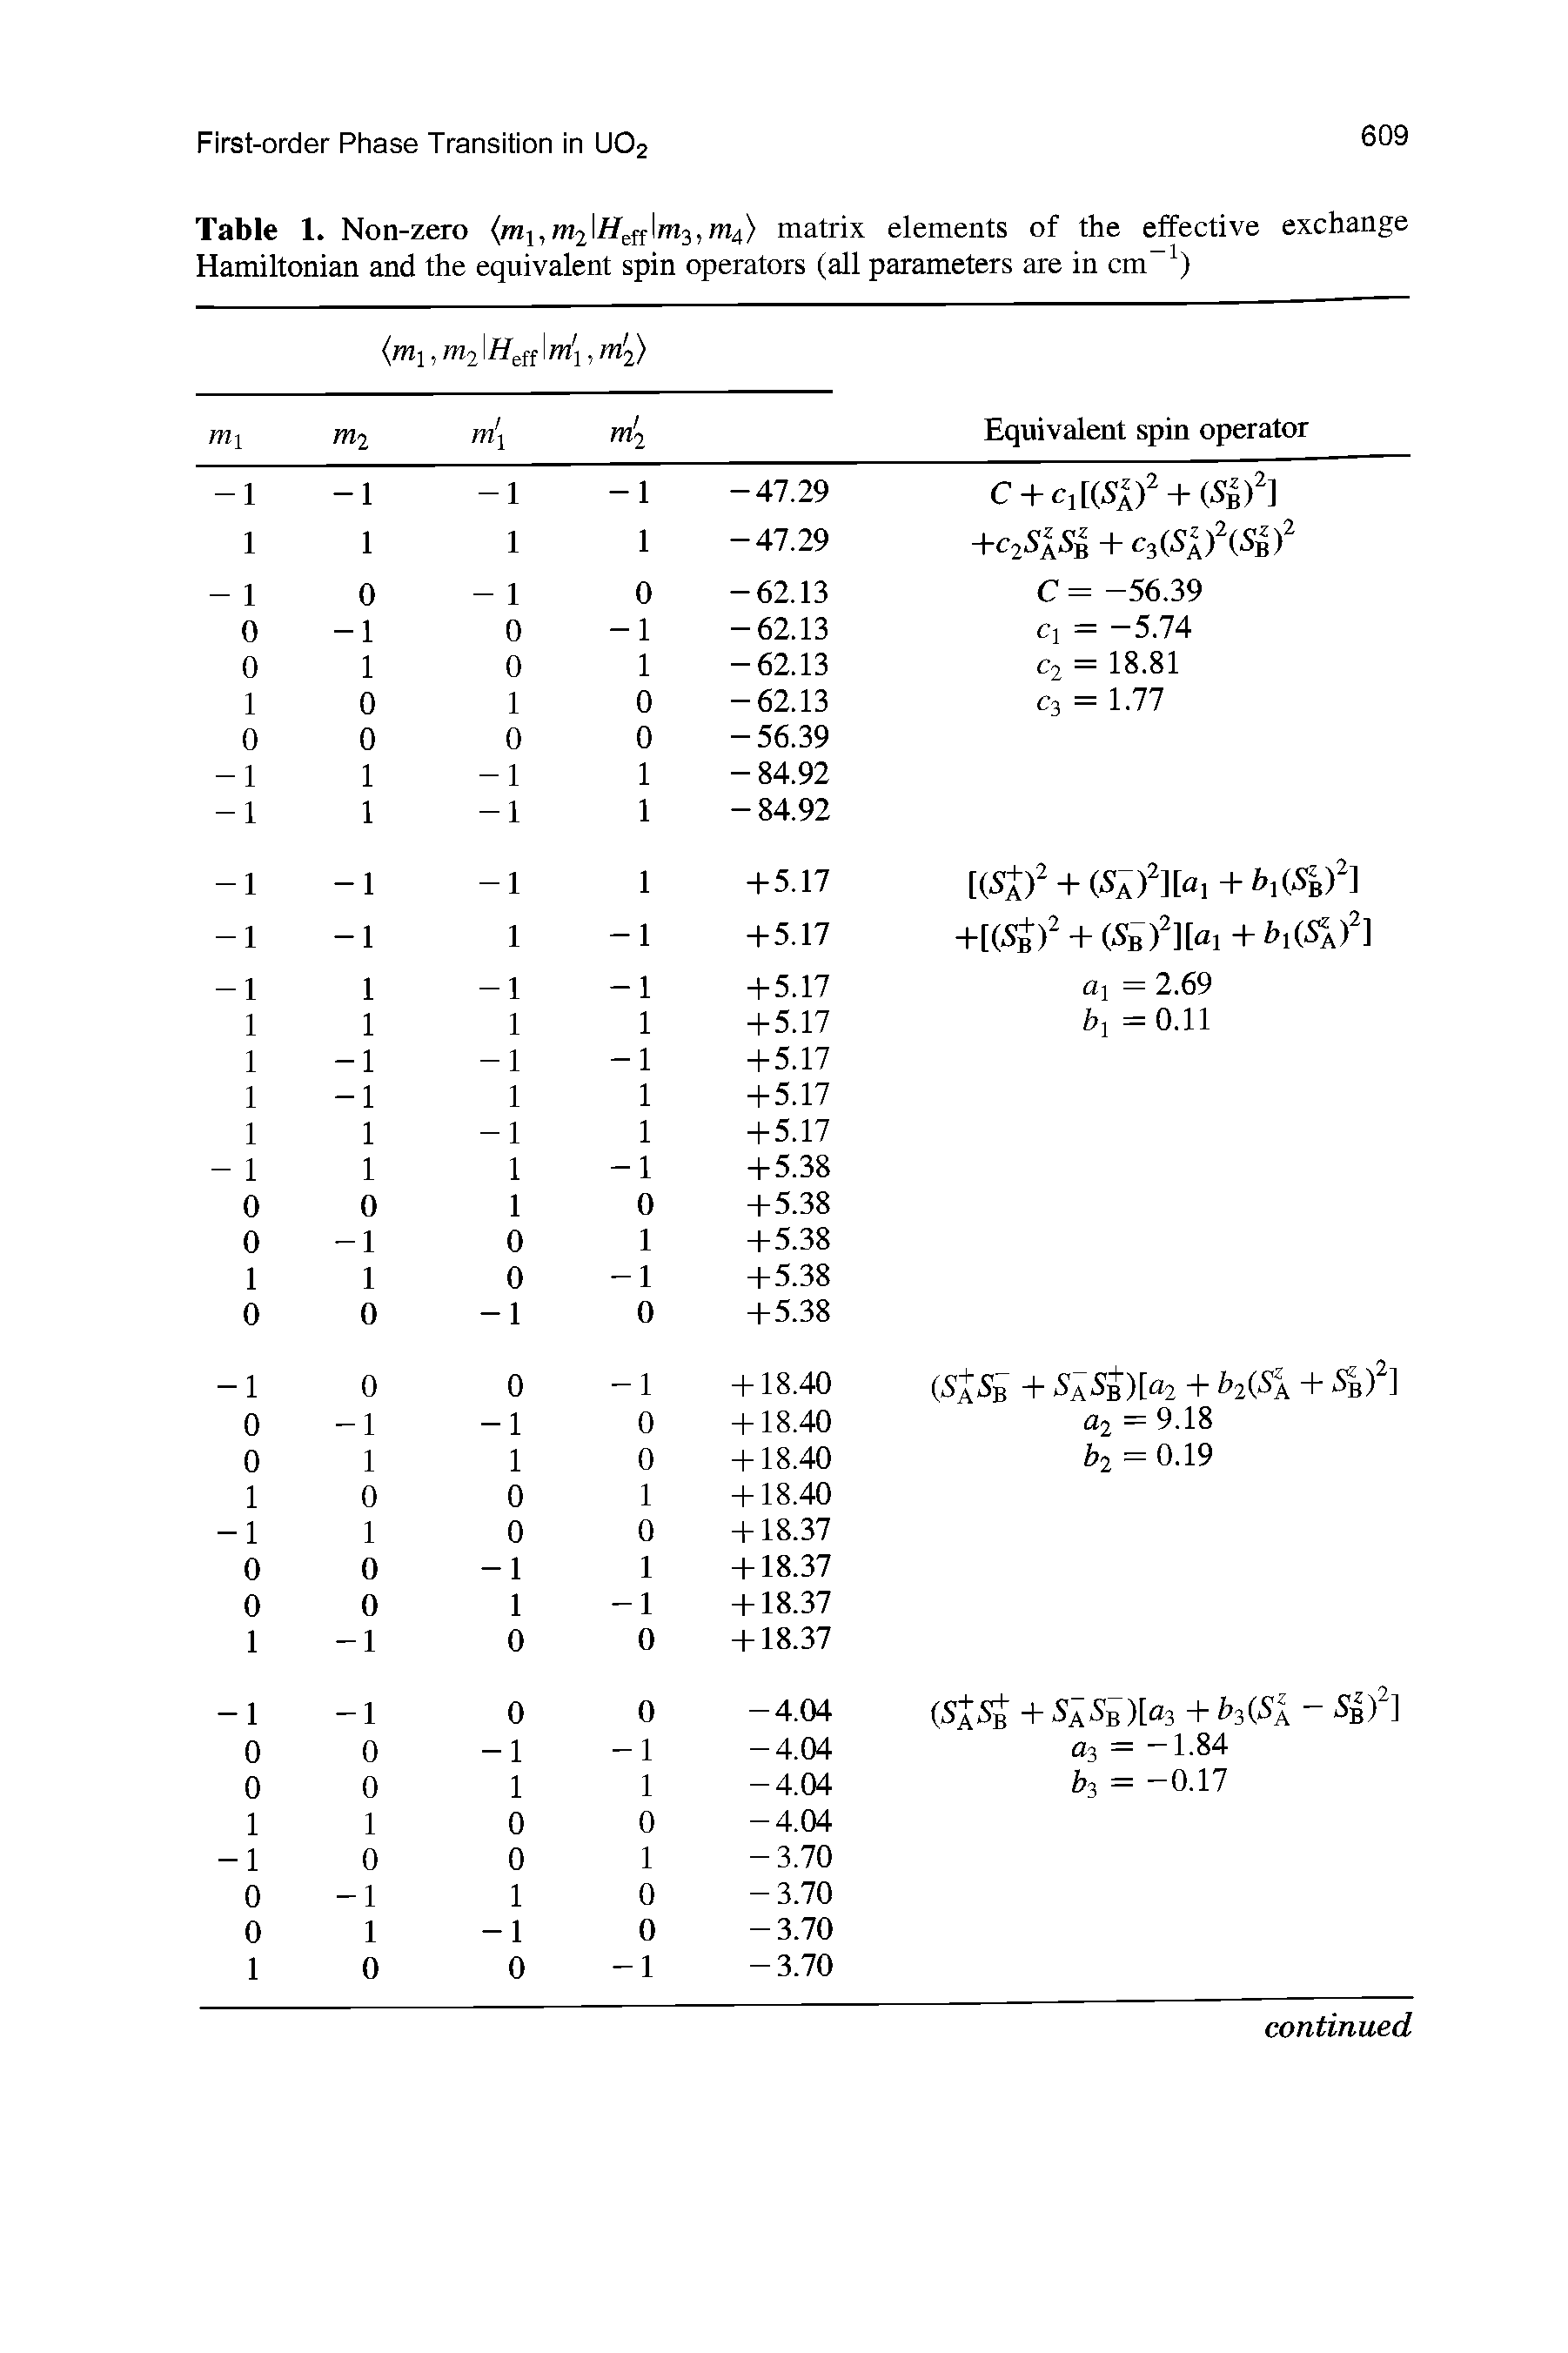 Table 1. Non -zero (ni],m2 Haflm3,m4) matrix elements of the effective exchange Hamiltonian and the equivalent spin operators (all parameters are in cm-1)...